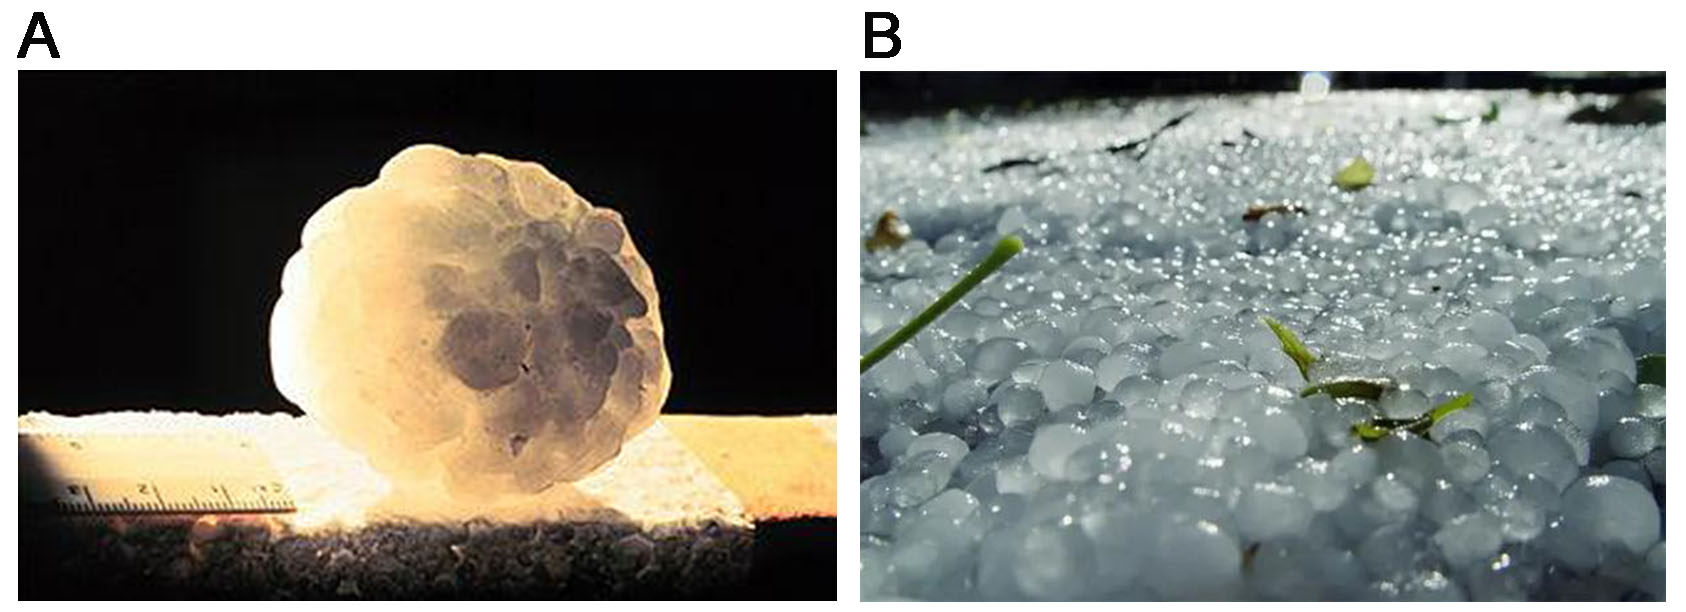 Microplastics in the cryosphere - a potential time bomb?